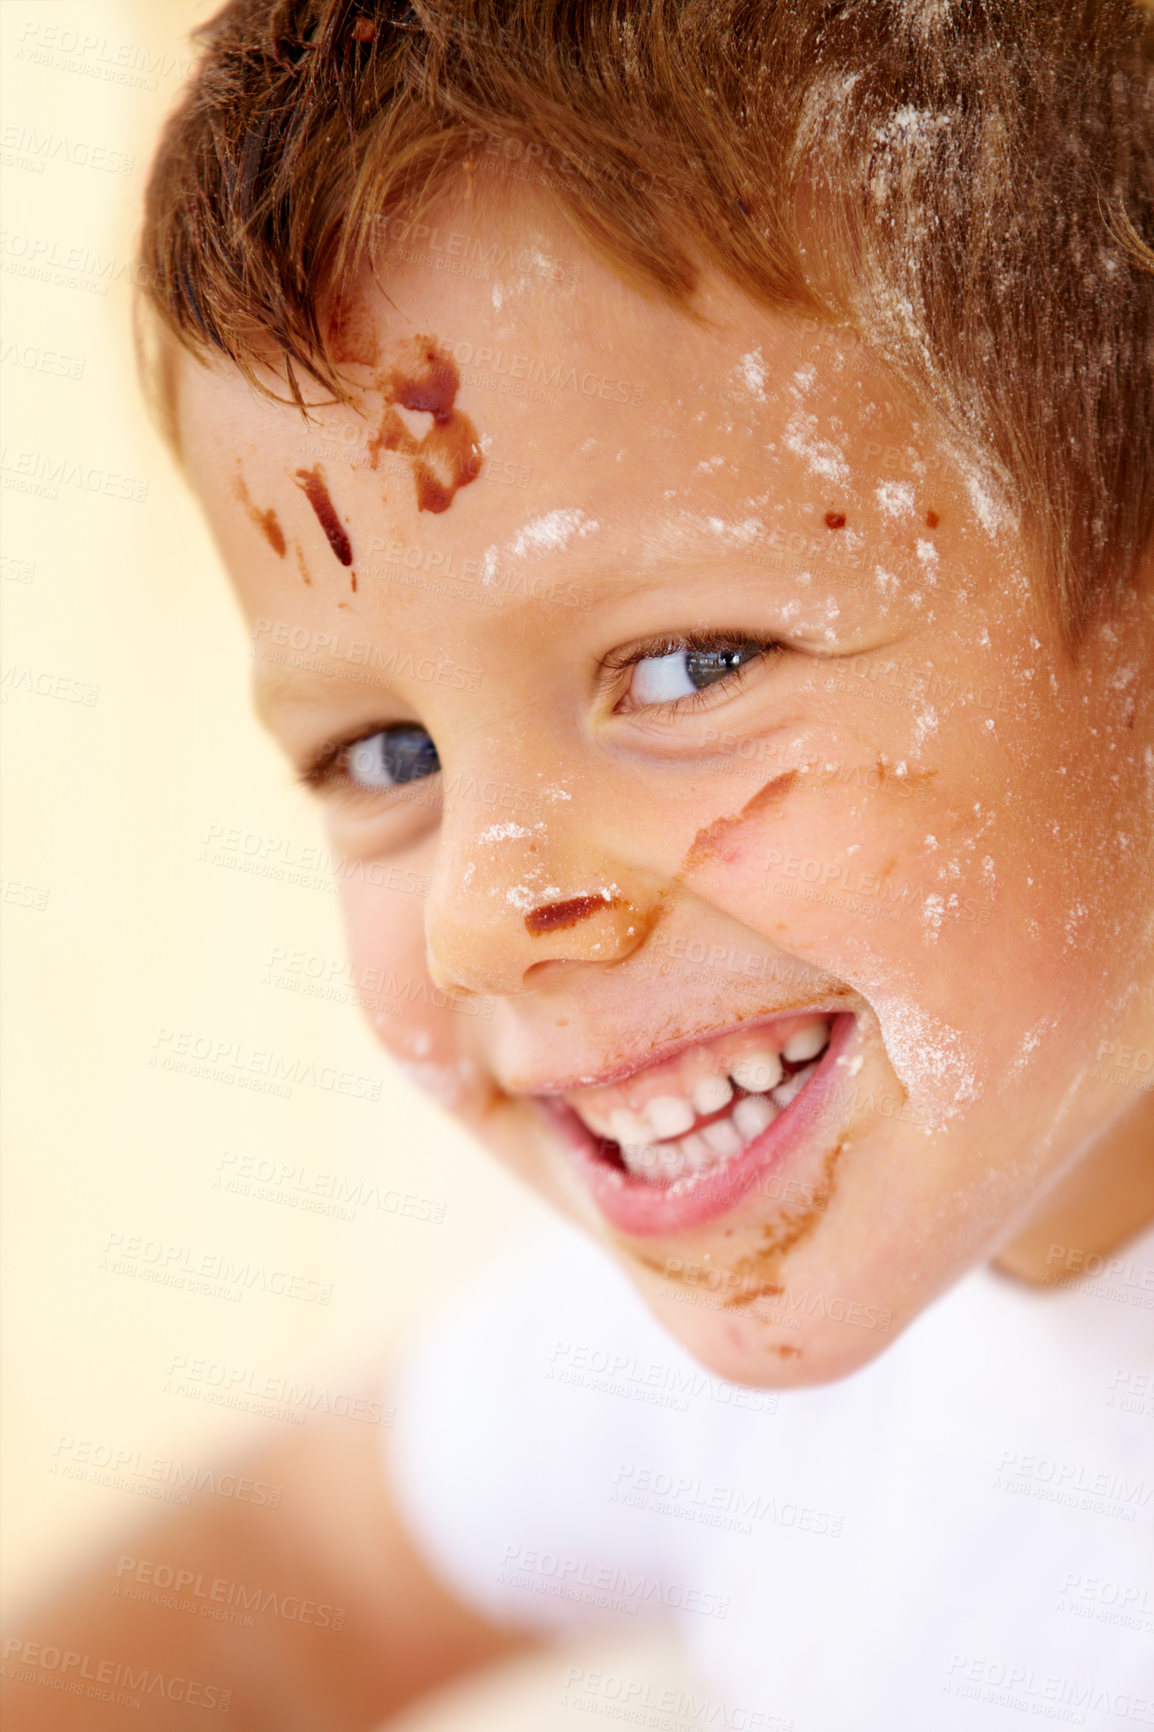 Buy stock photo Portrait, smile and flour with a child in the kitchen of his home, learning how to bake for development. Children, cooking and a happy young kid looking naughty with food ingredients on his face